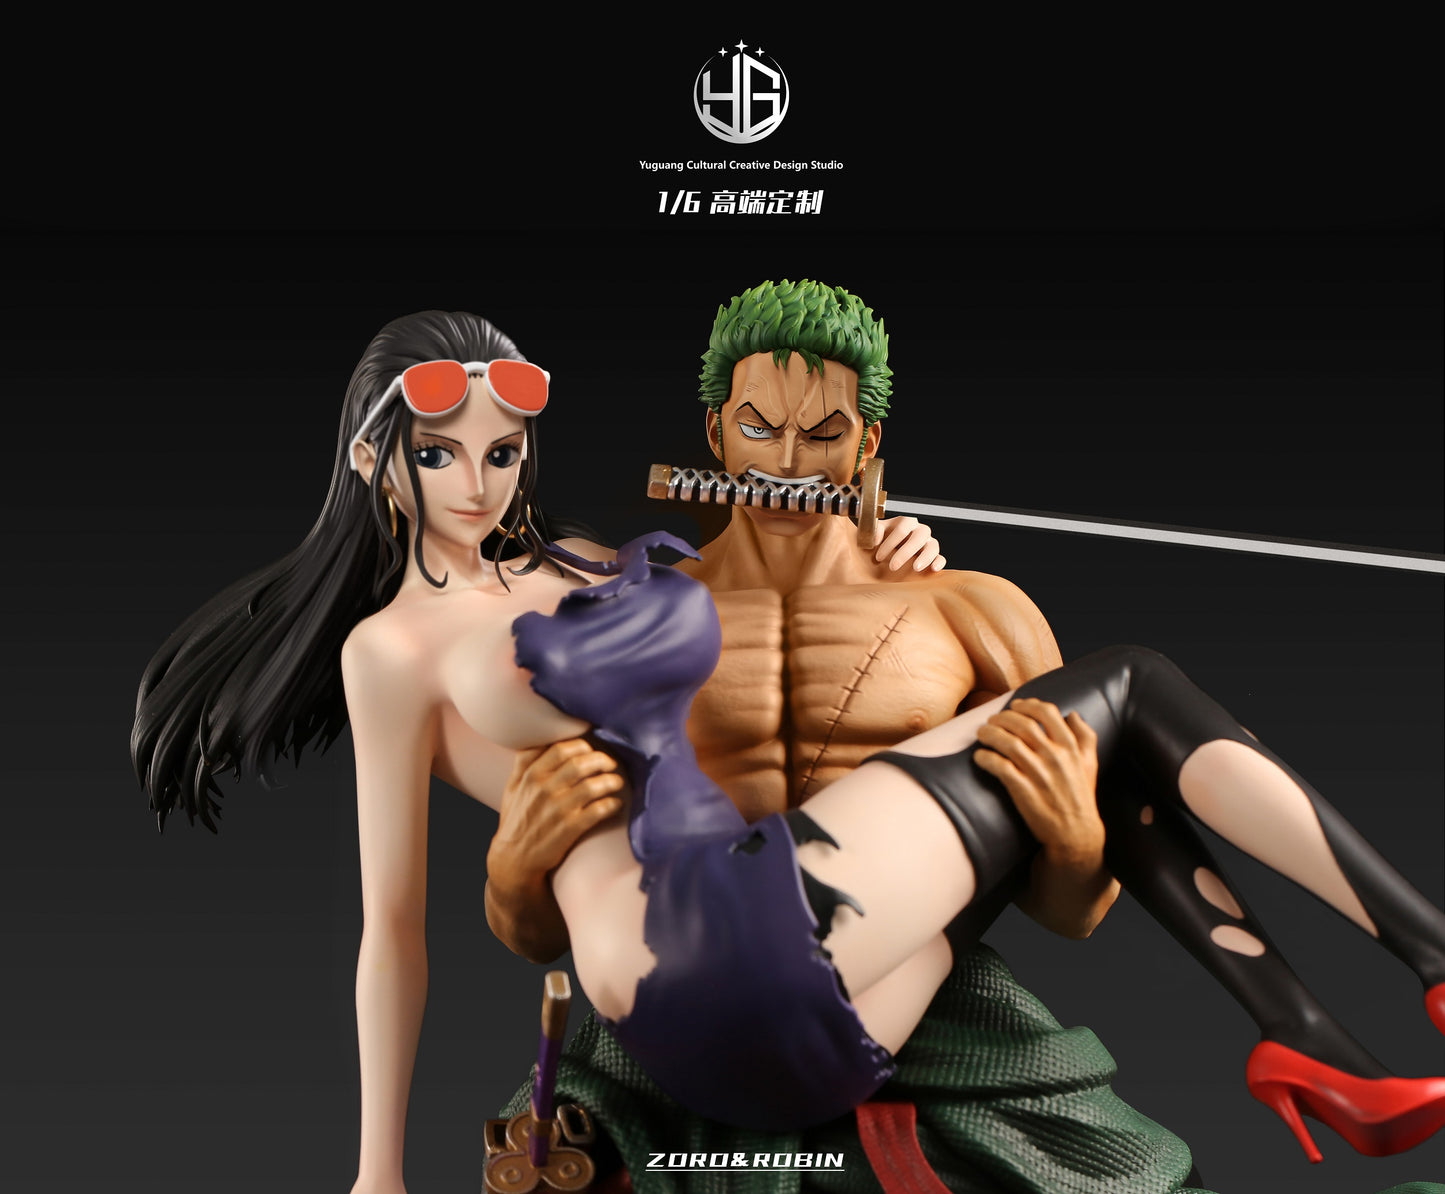 Yu Guang Design - Zoro and Robin [PRE-ORDER CLOSED]